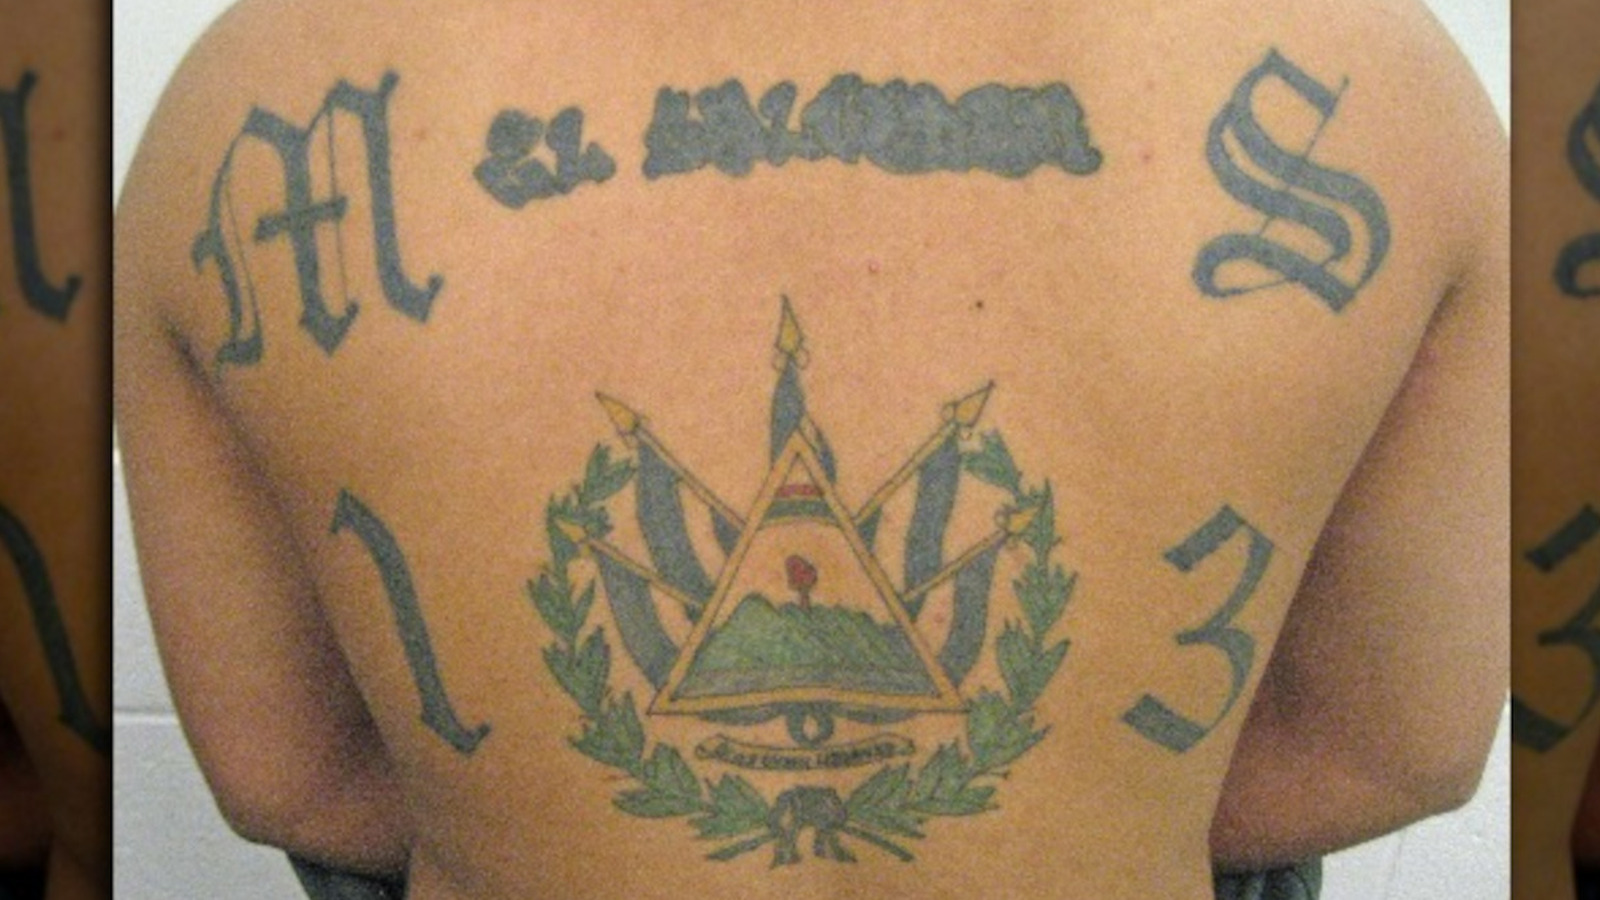 Prison Tattoos and Their Meanings  TatRing